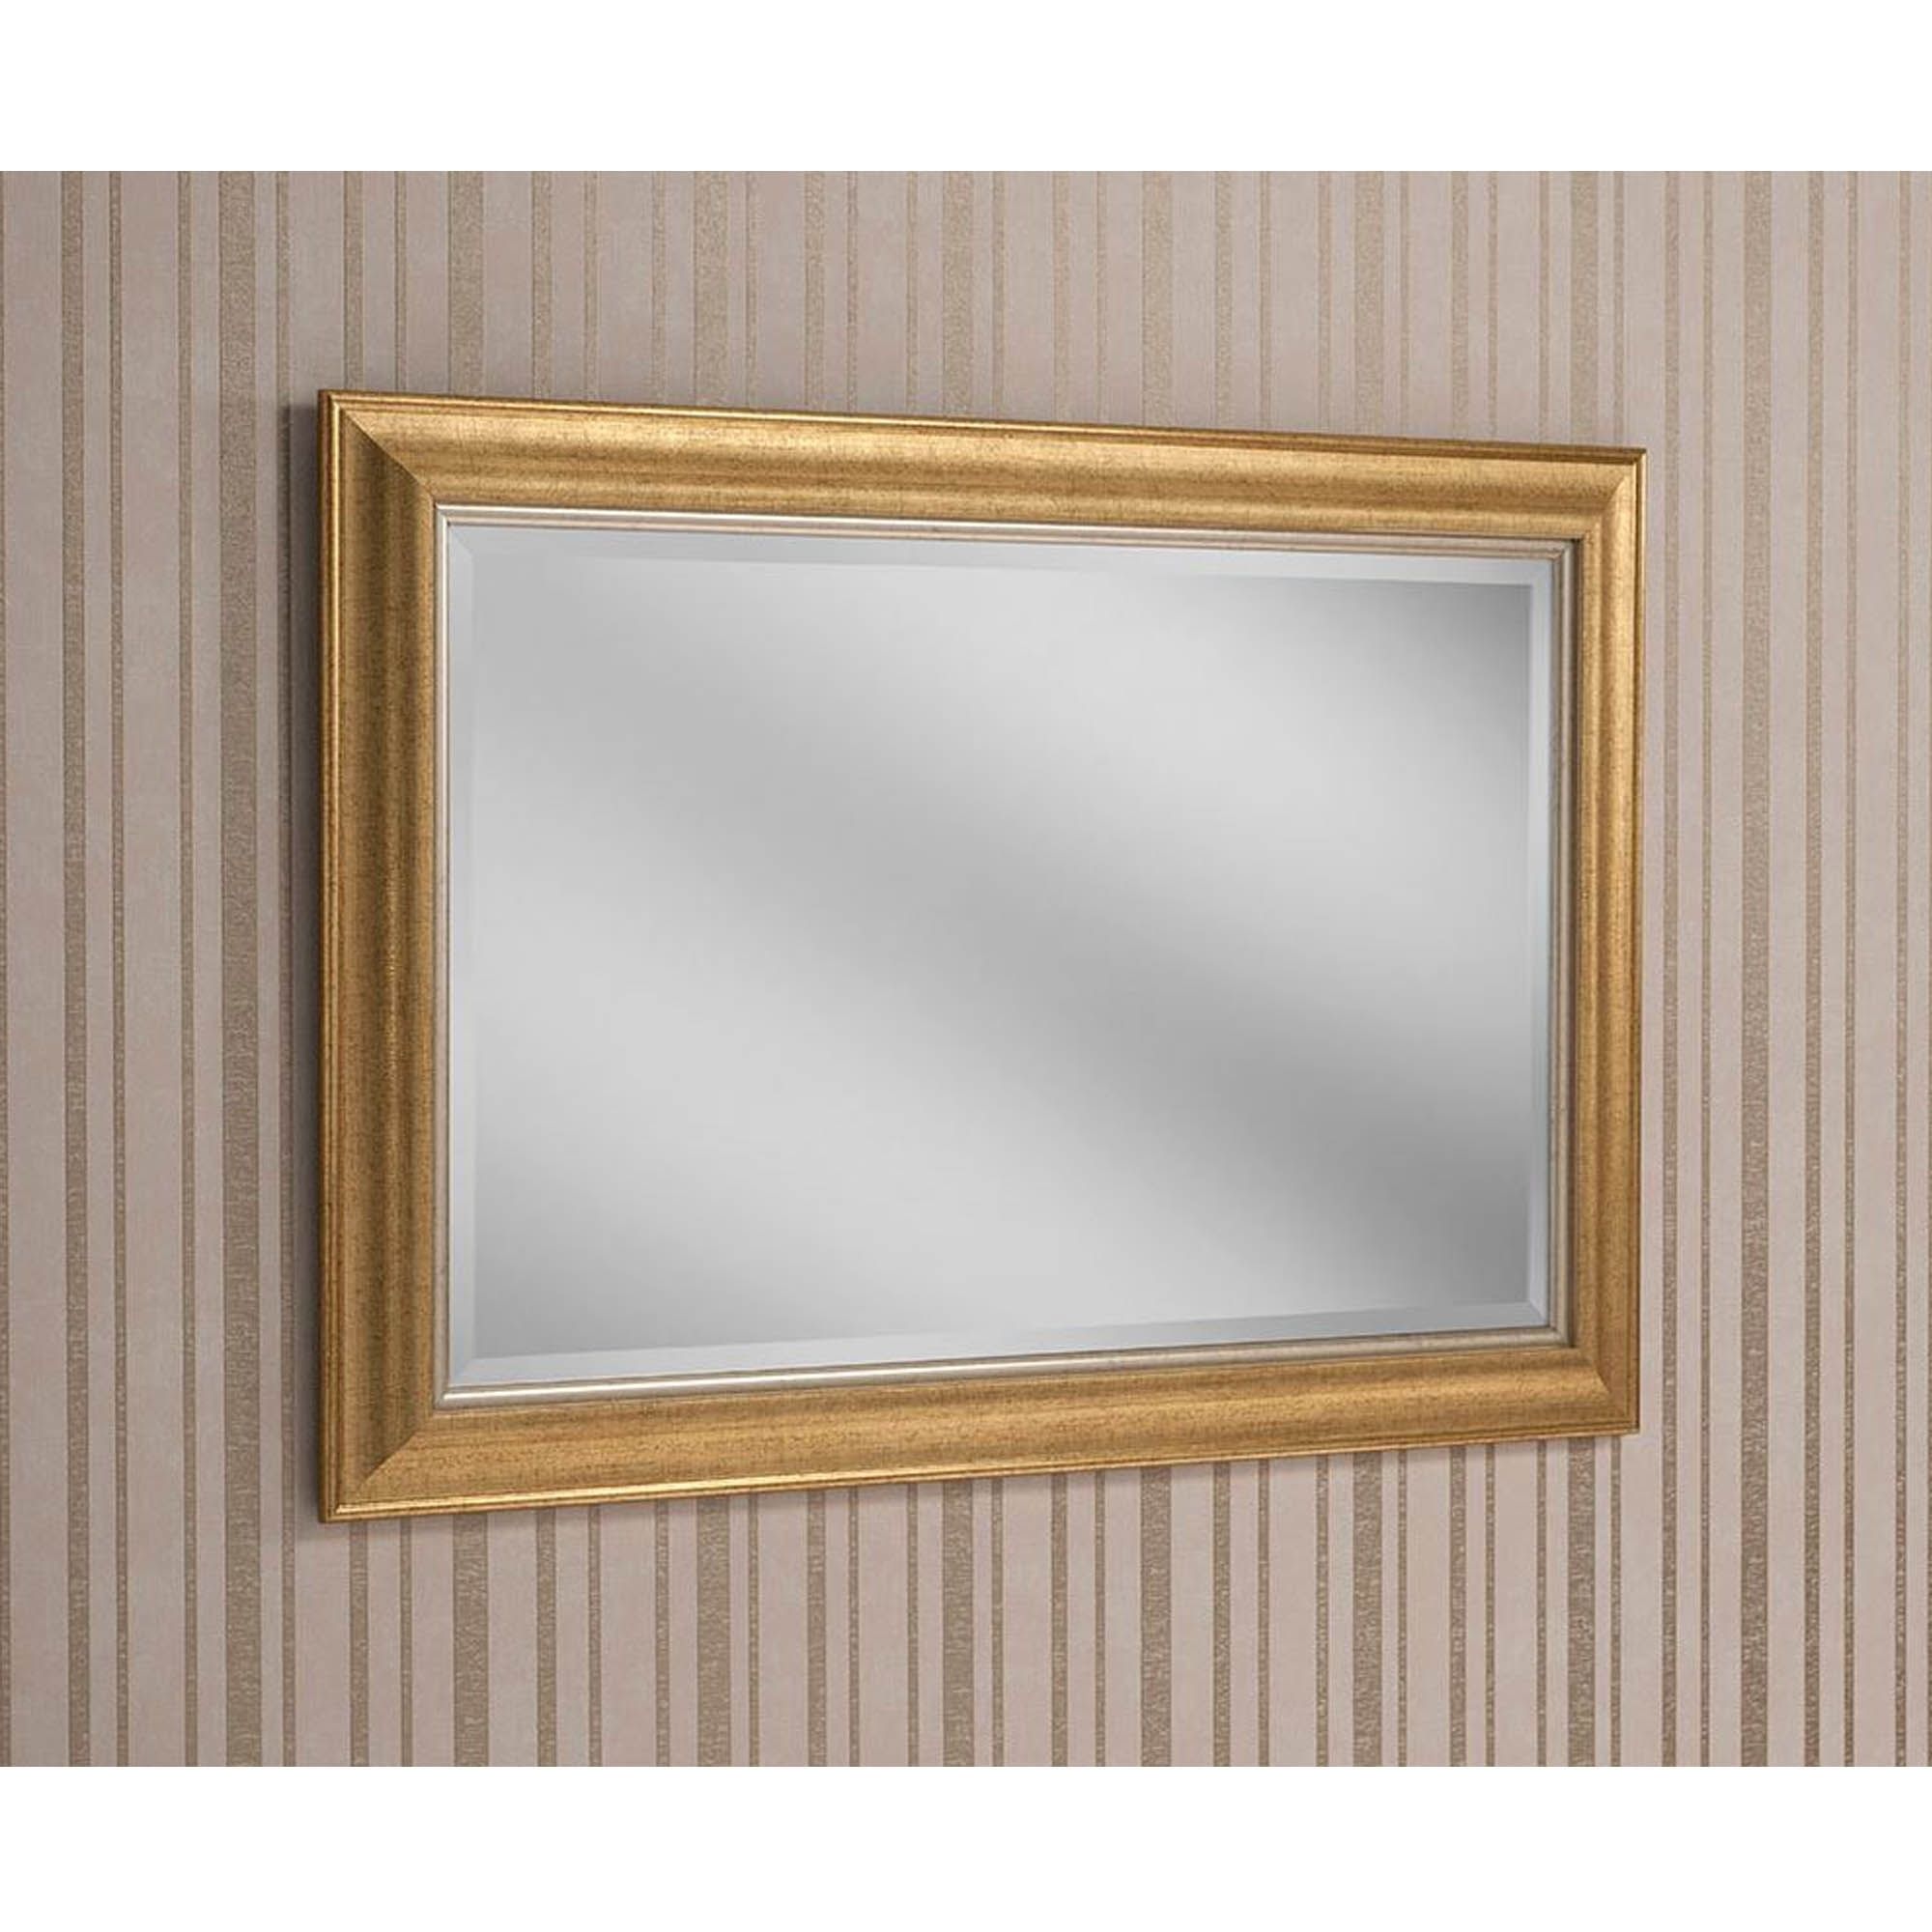 Decorative Gold Rectangular Wall Mirror | Homesdirect365 With Regard To Dark Gold Rectangular Wall Mirrors (View 6 of 15)